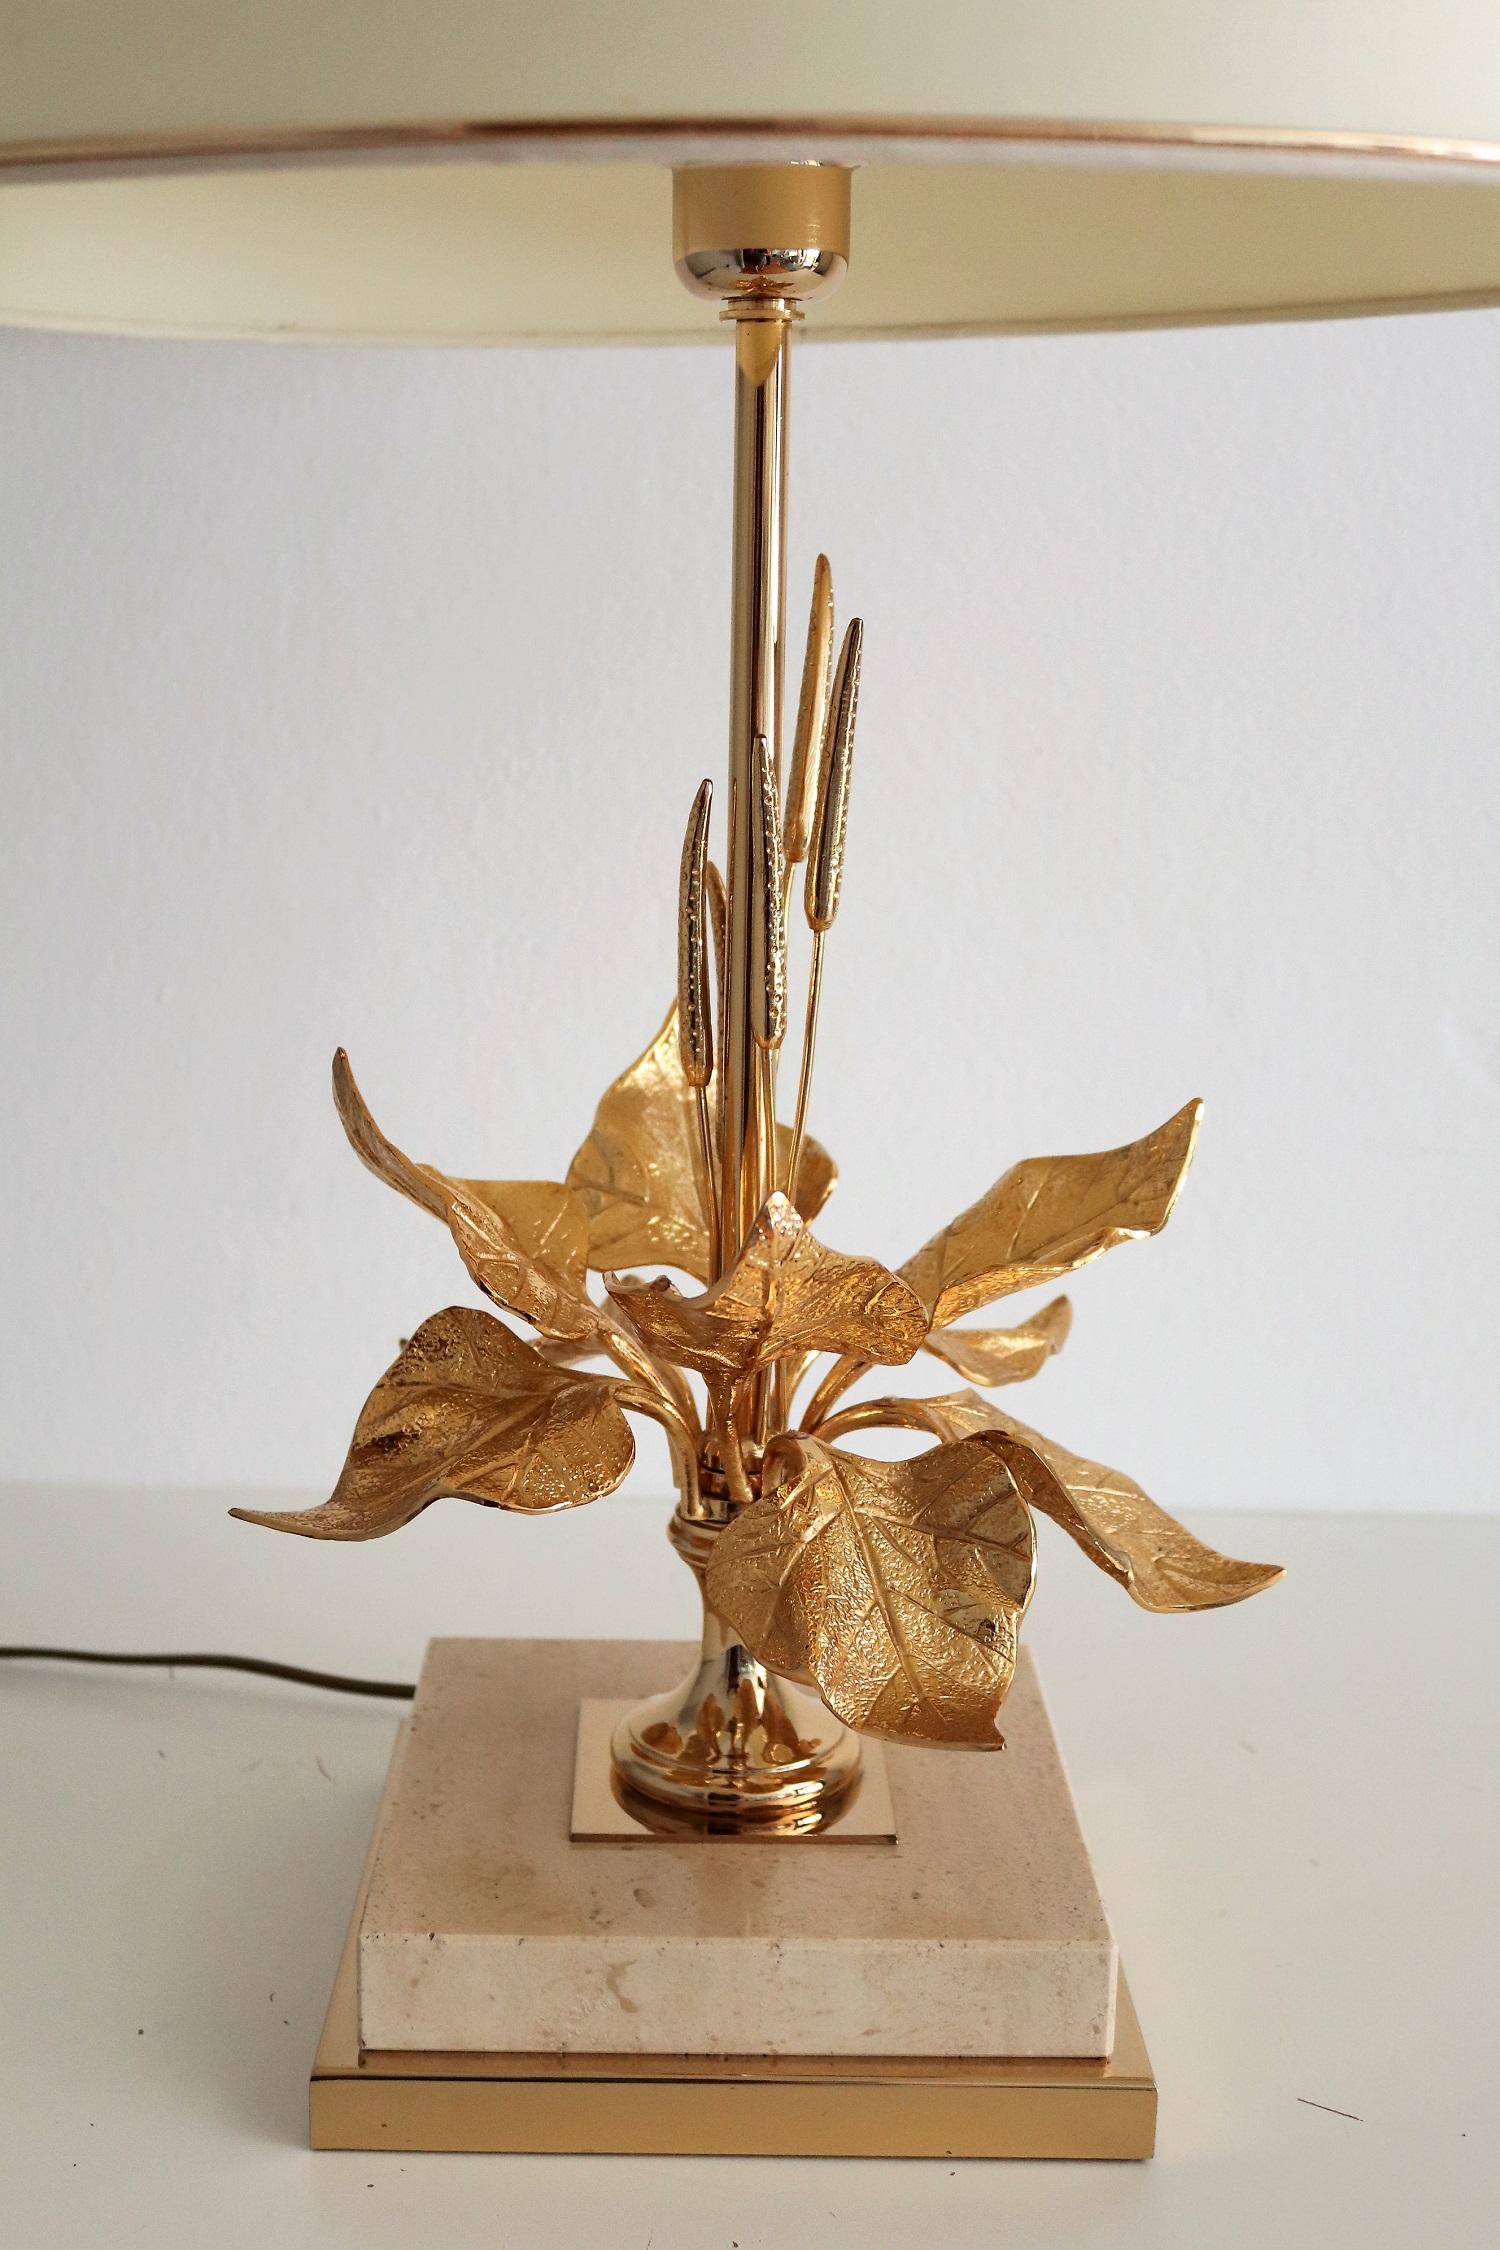 Beautiful table lamp with heavy travertine marble base and gold plated brass flower.
Made in France attributed Maison Charles during the 1970s.
The lamp is in nearly excellent original condition with smallest signs of wear and fits still the